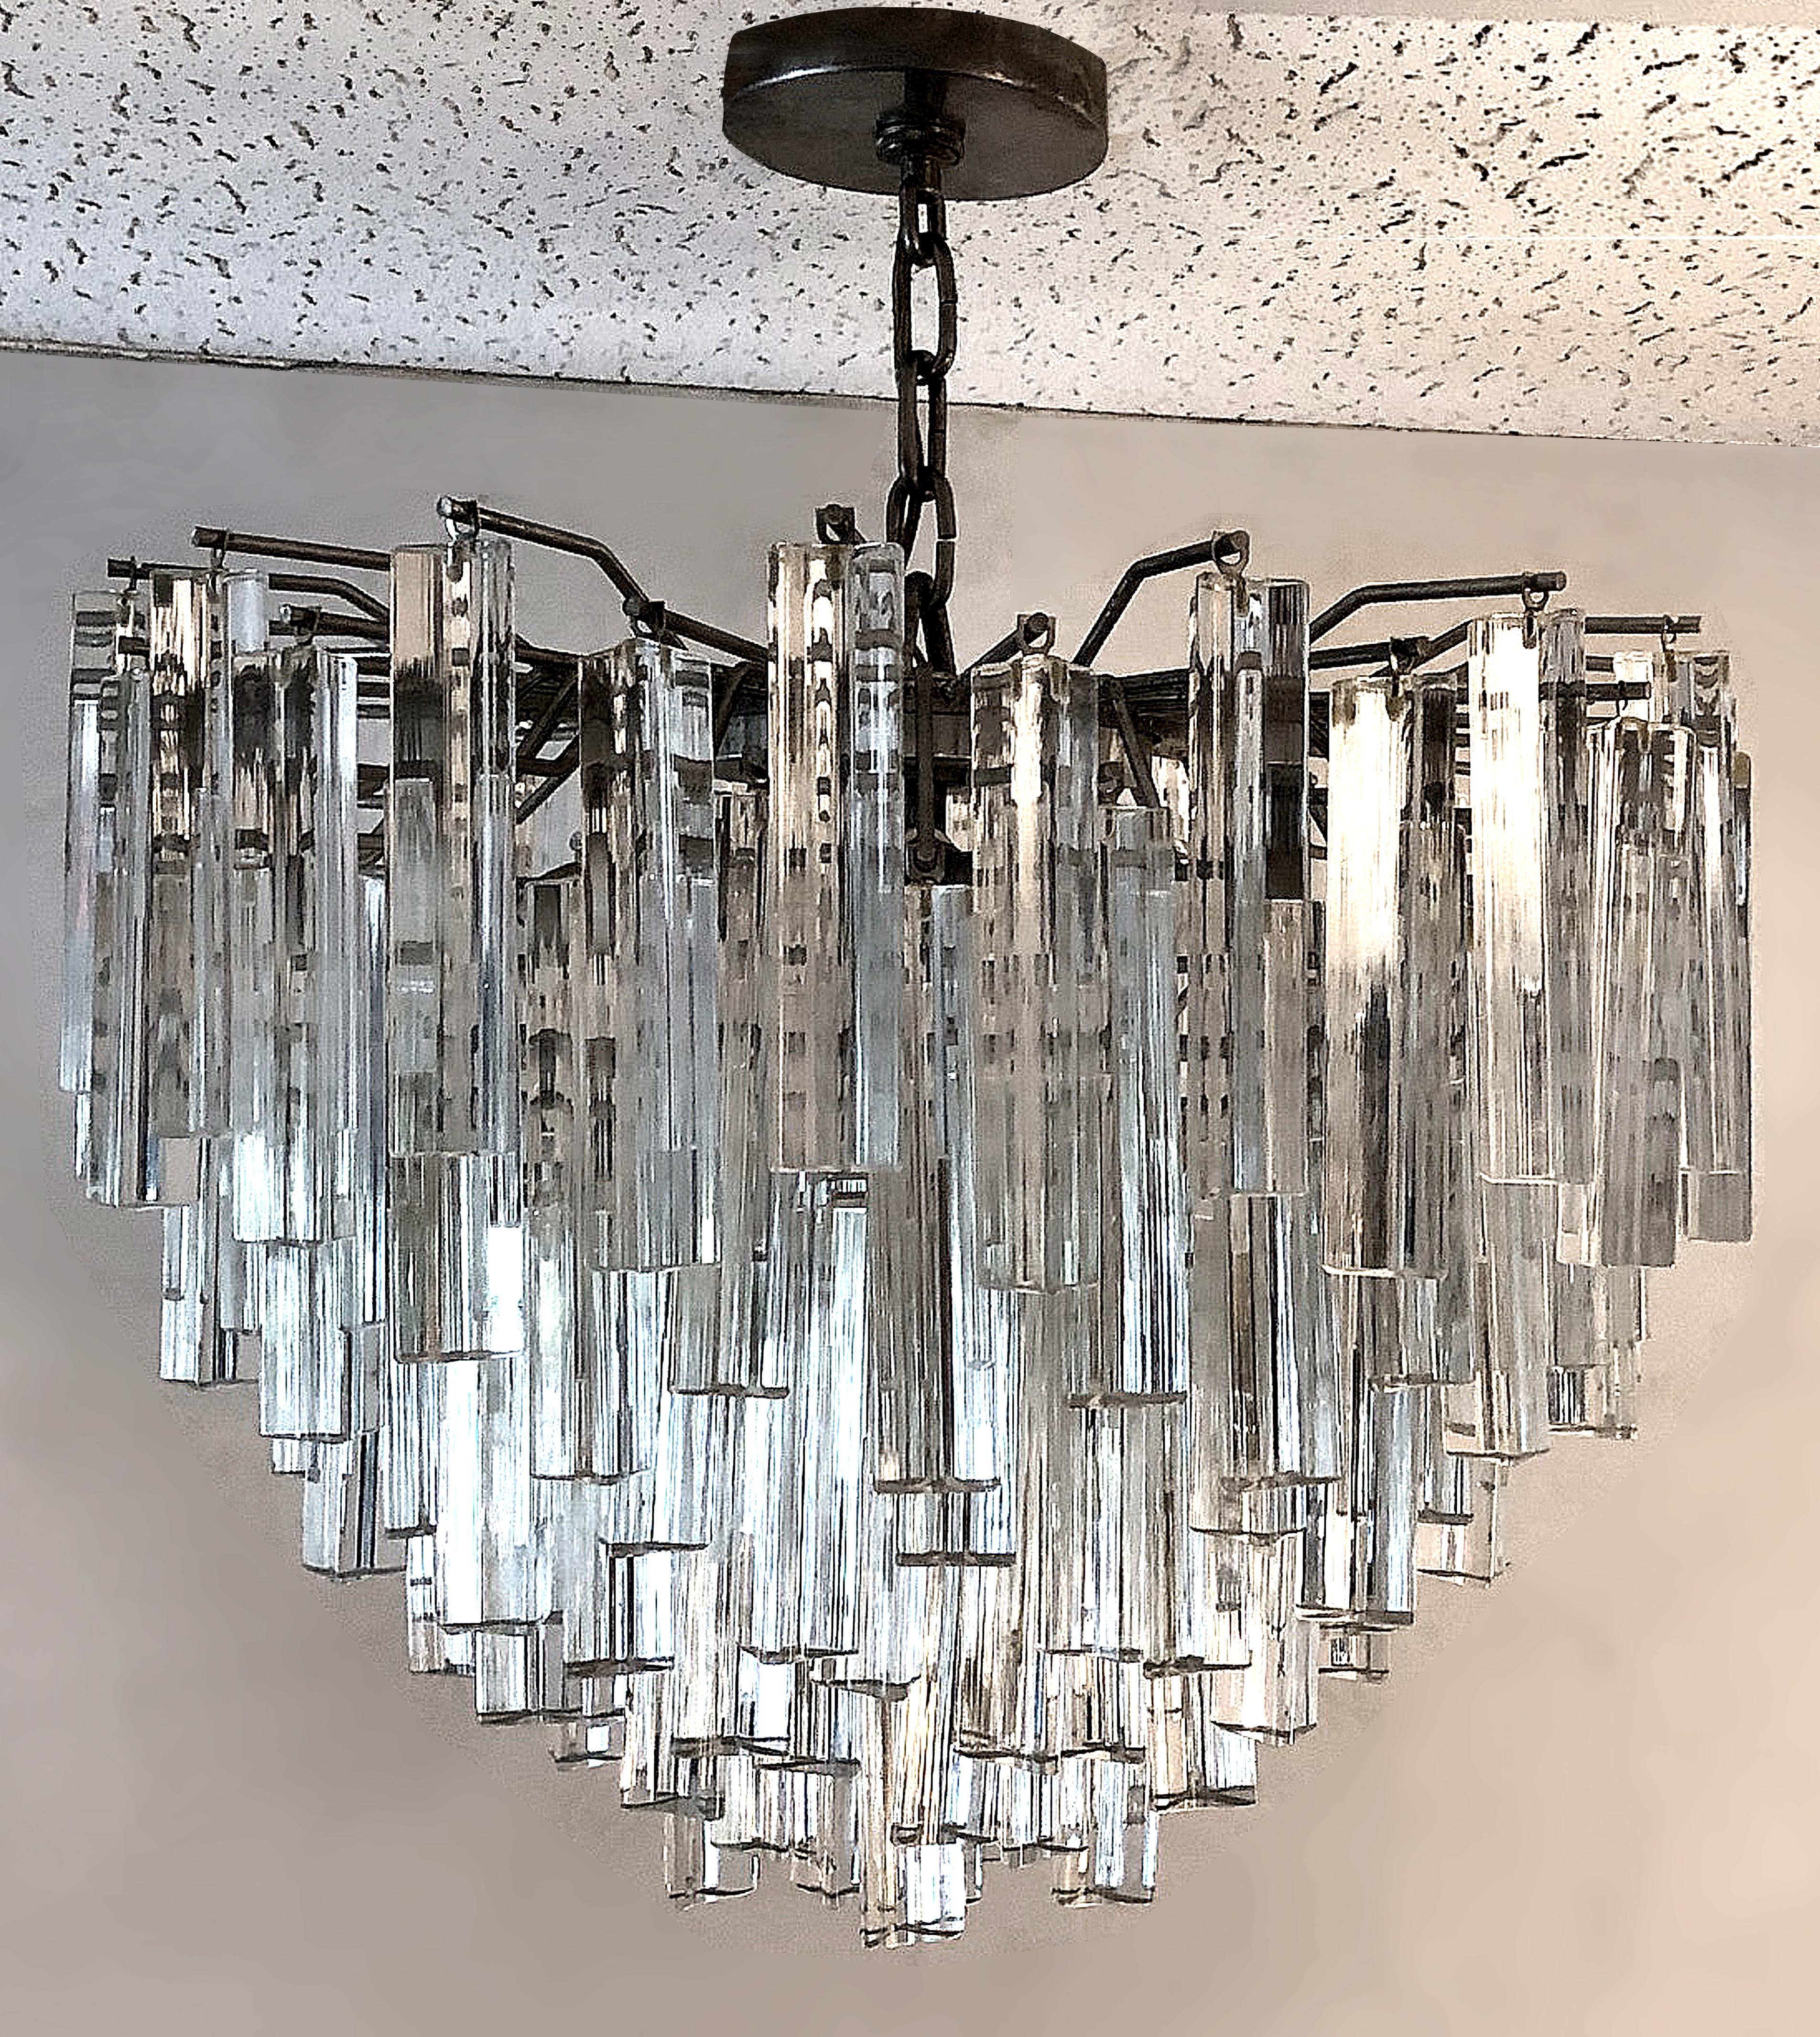 1970s Italian Modern Venini Triedri glass chandelier

Offered for sale is a circa 1970s Italian Modern dense tiered chandelier with Venini Triedri glass spears. We have seven extra spears that will be included with the purchase. This round fixture